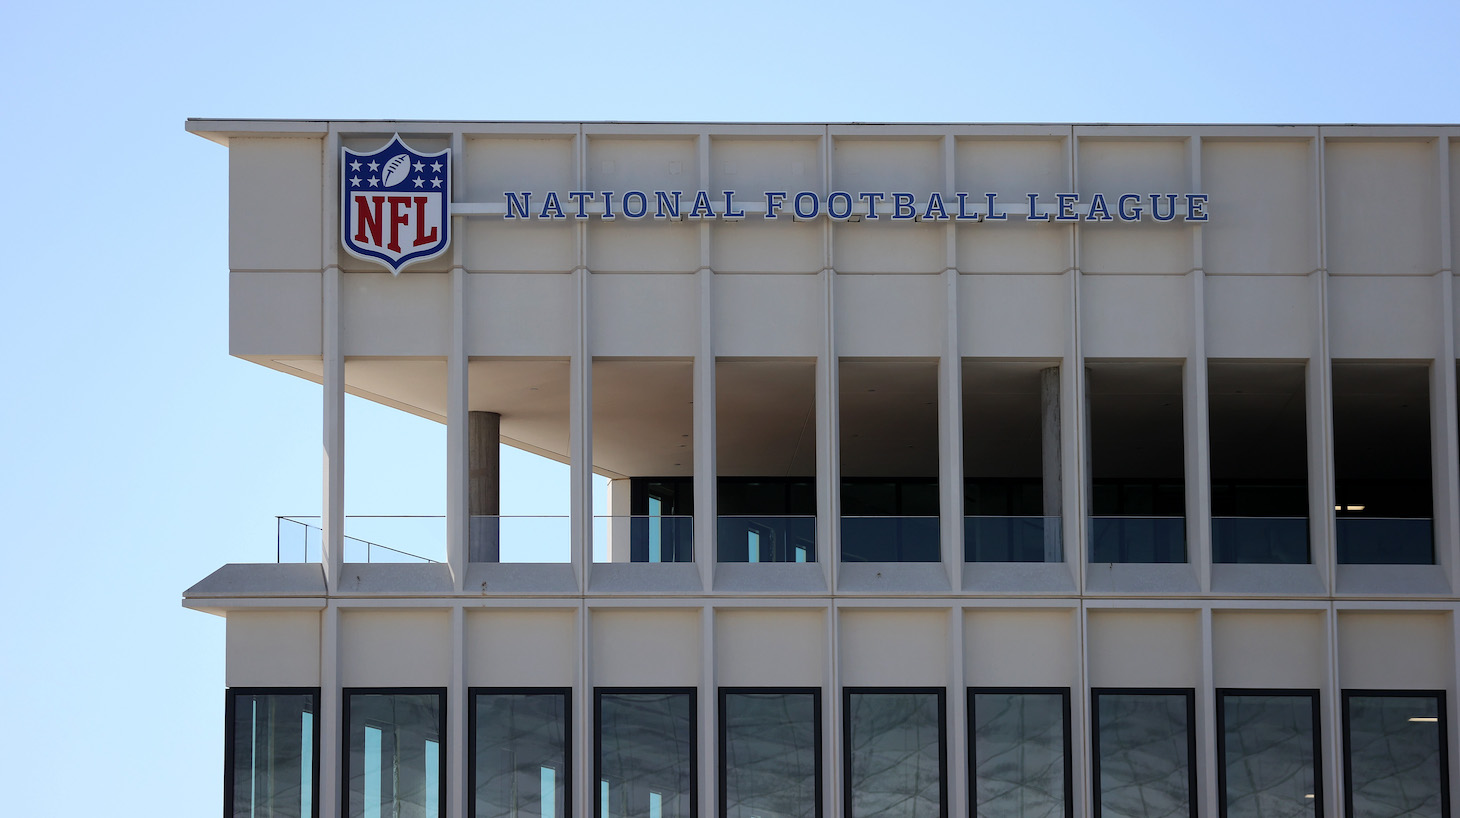 INGLEWOOD, CALIFORNIA - OCTOBER 10: The National Football League offices on October 10, 2021 in Inglewood, California. (Photo by Ronald Martinez/Getty Images)